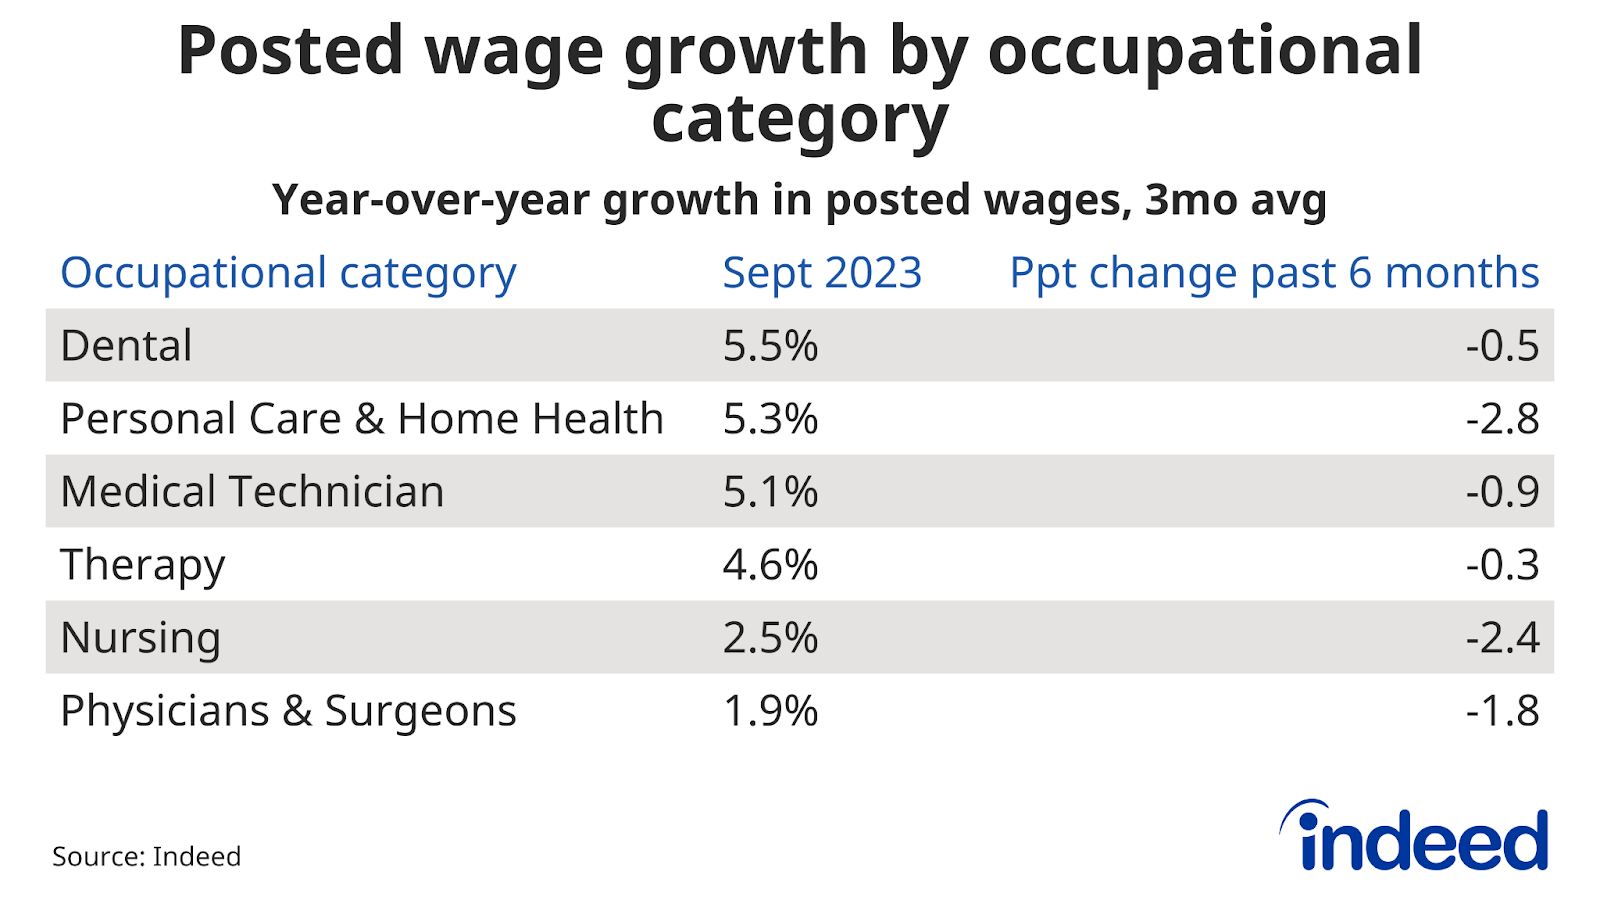 Table titled "Posted wage growth by occupational category," shows year-over-year growth in posted wages through September 2023 and the percentage point change in the past six months, by job category. Personal Care & Home Health and Nursing wages have grown 5.3% and 2.5 year-over-year, respectively.